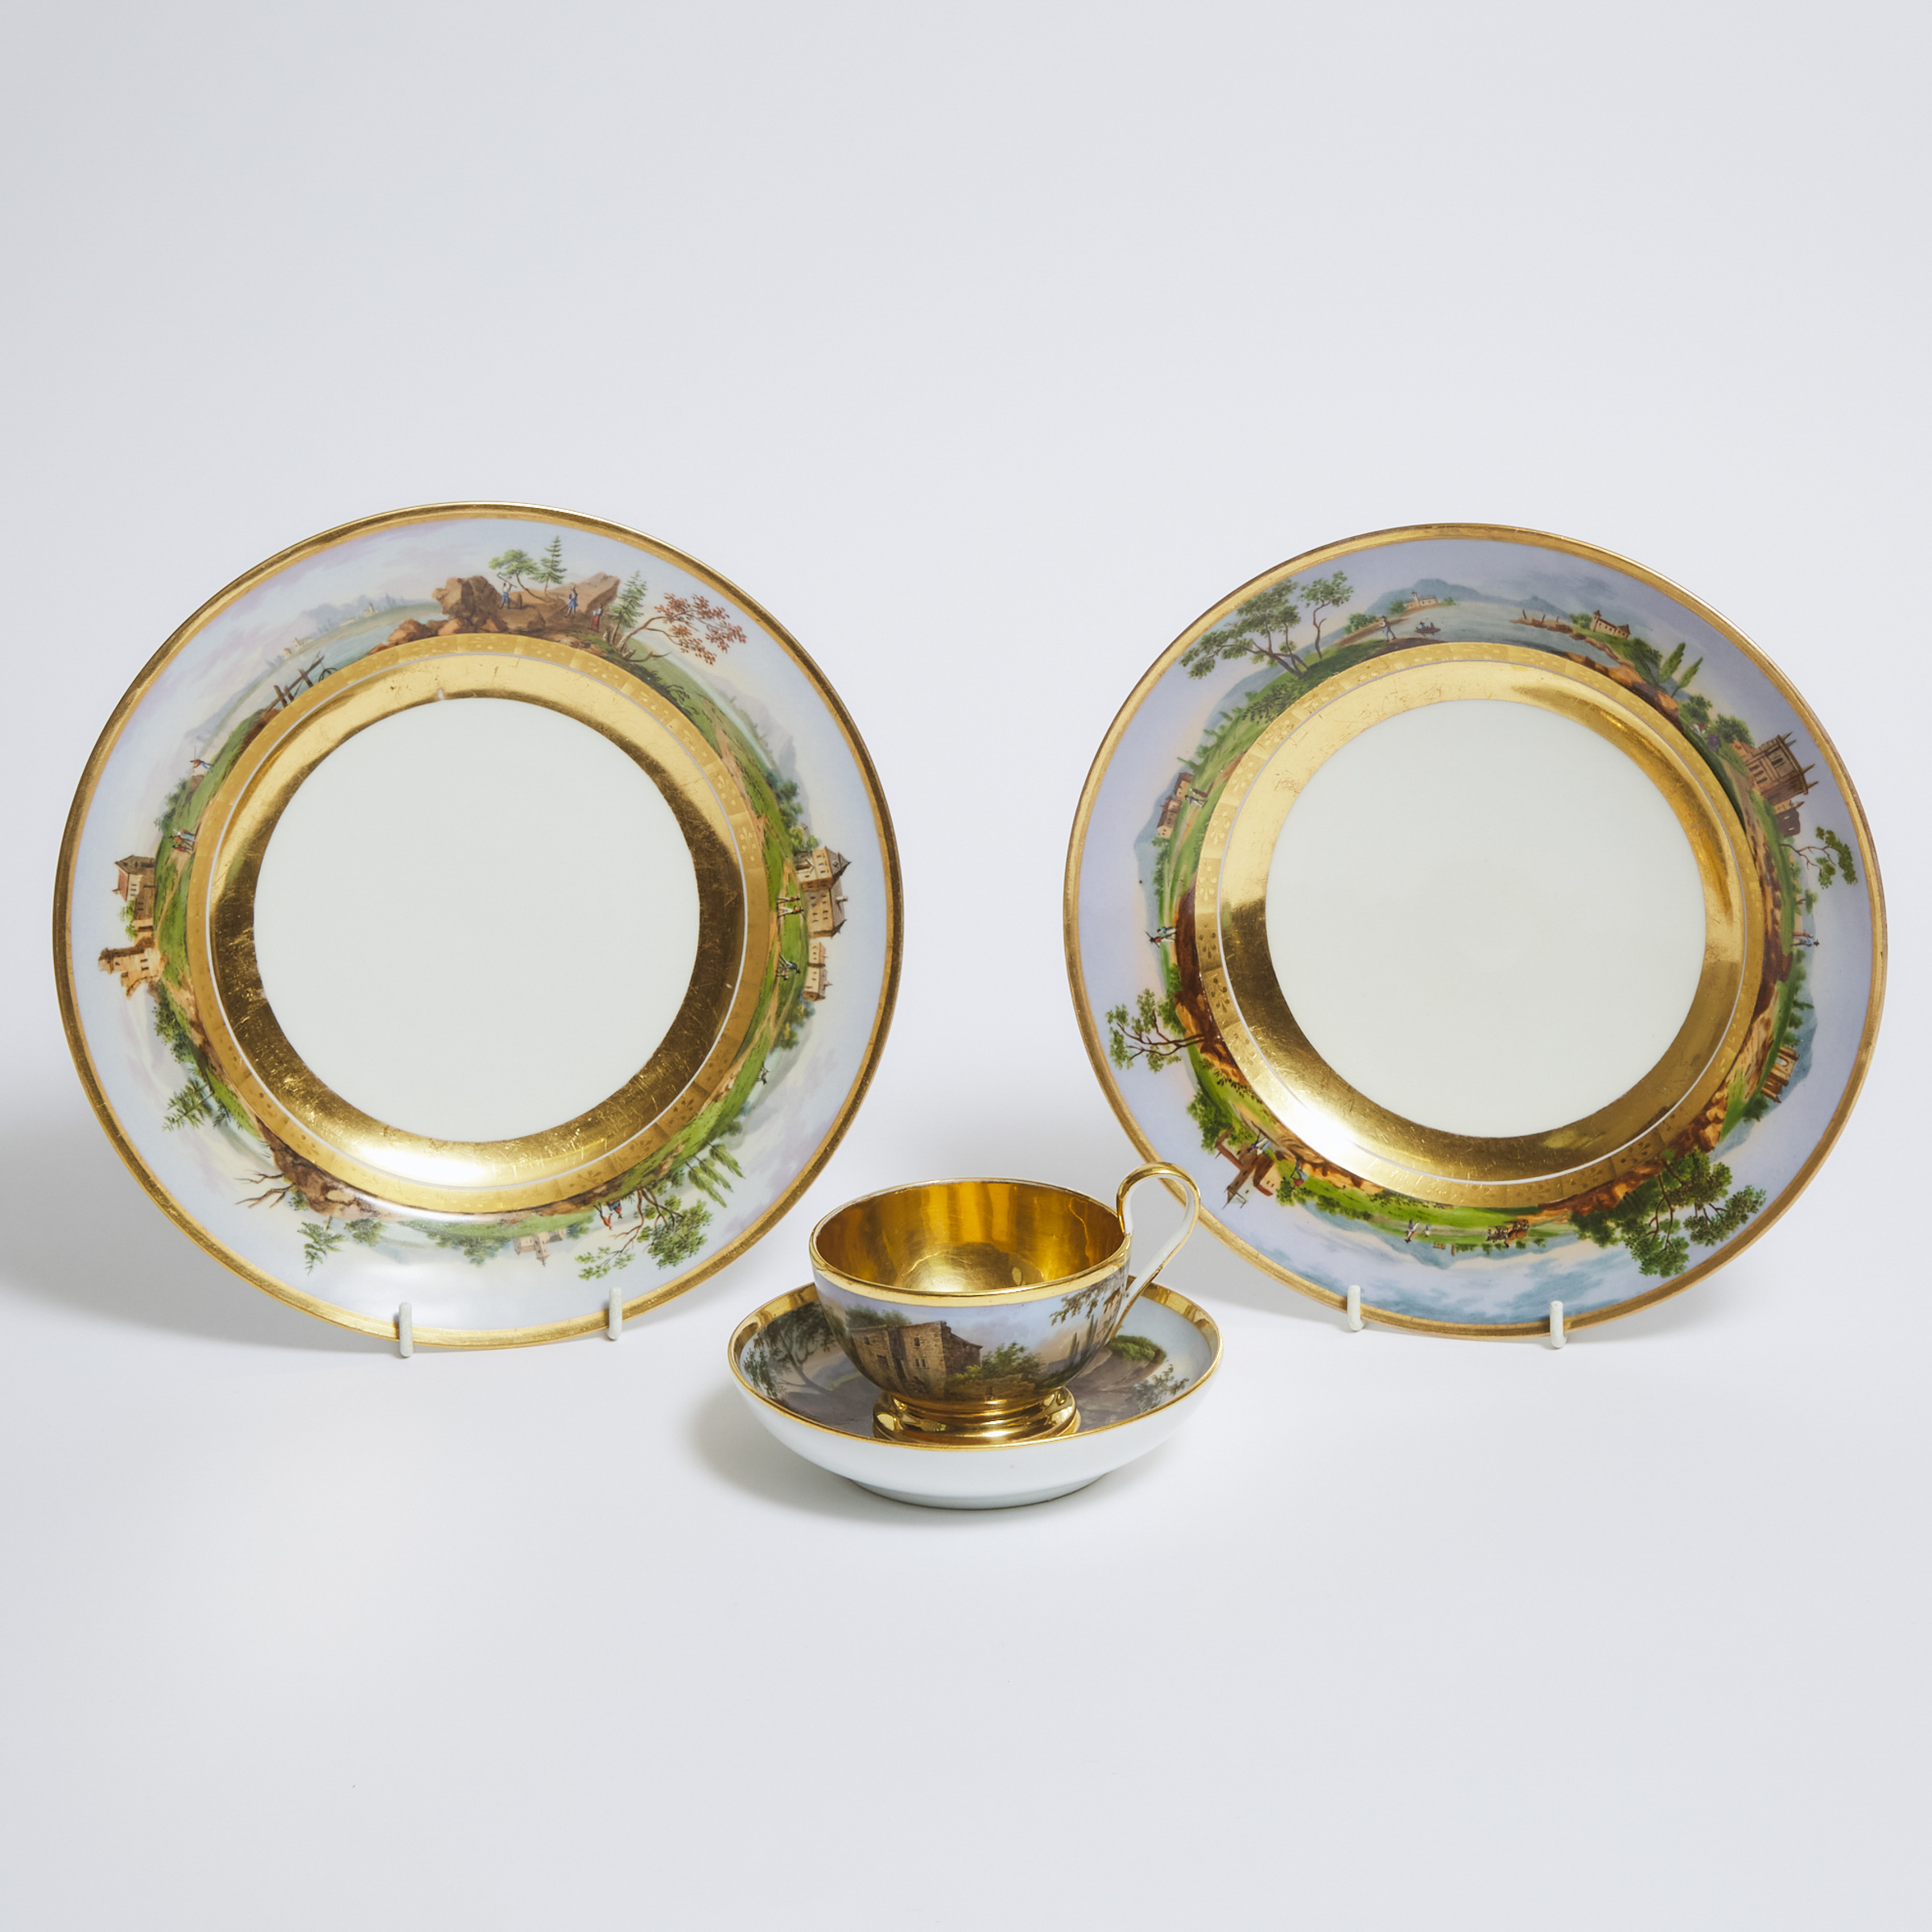 Pair of Vienna Plates and a Schoelcher Paris Porcelain Cup and Saucer, 19th century